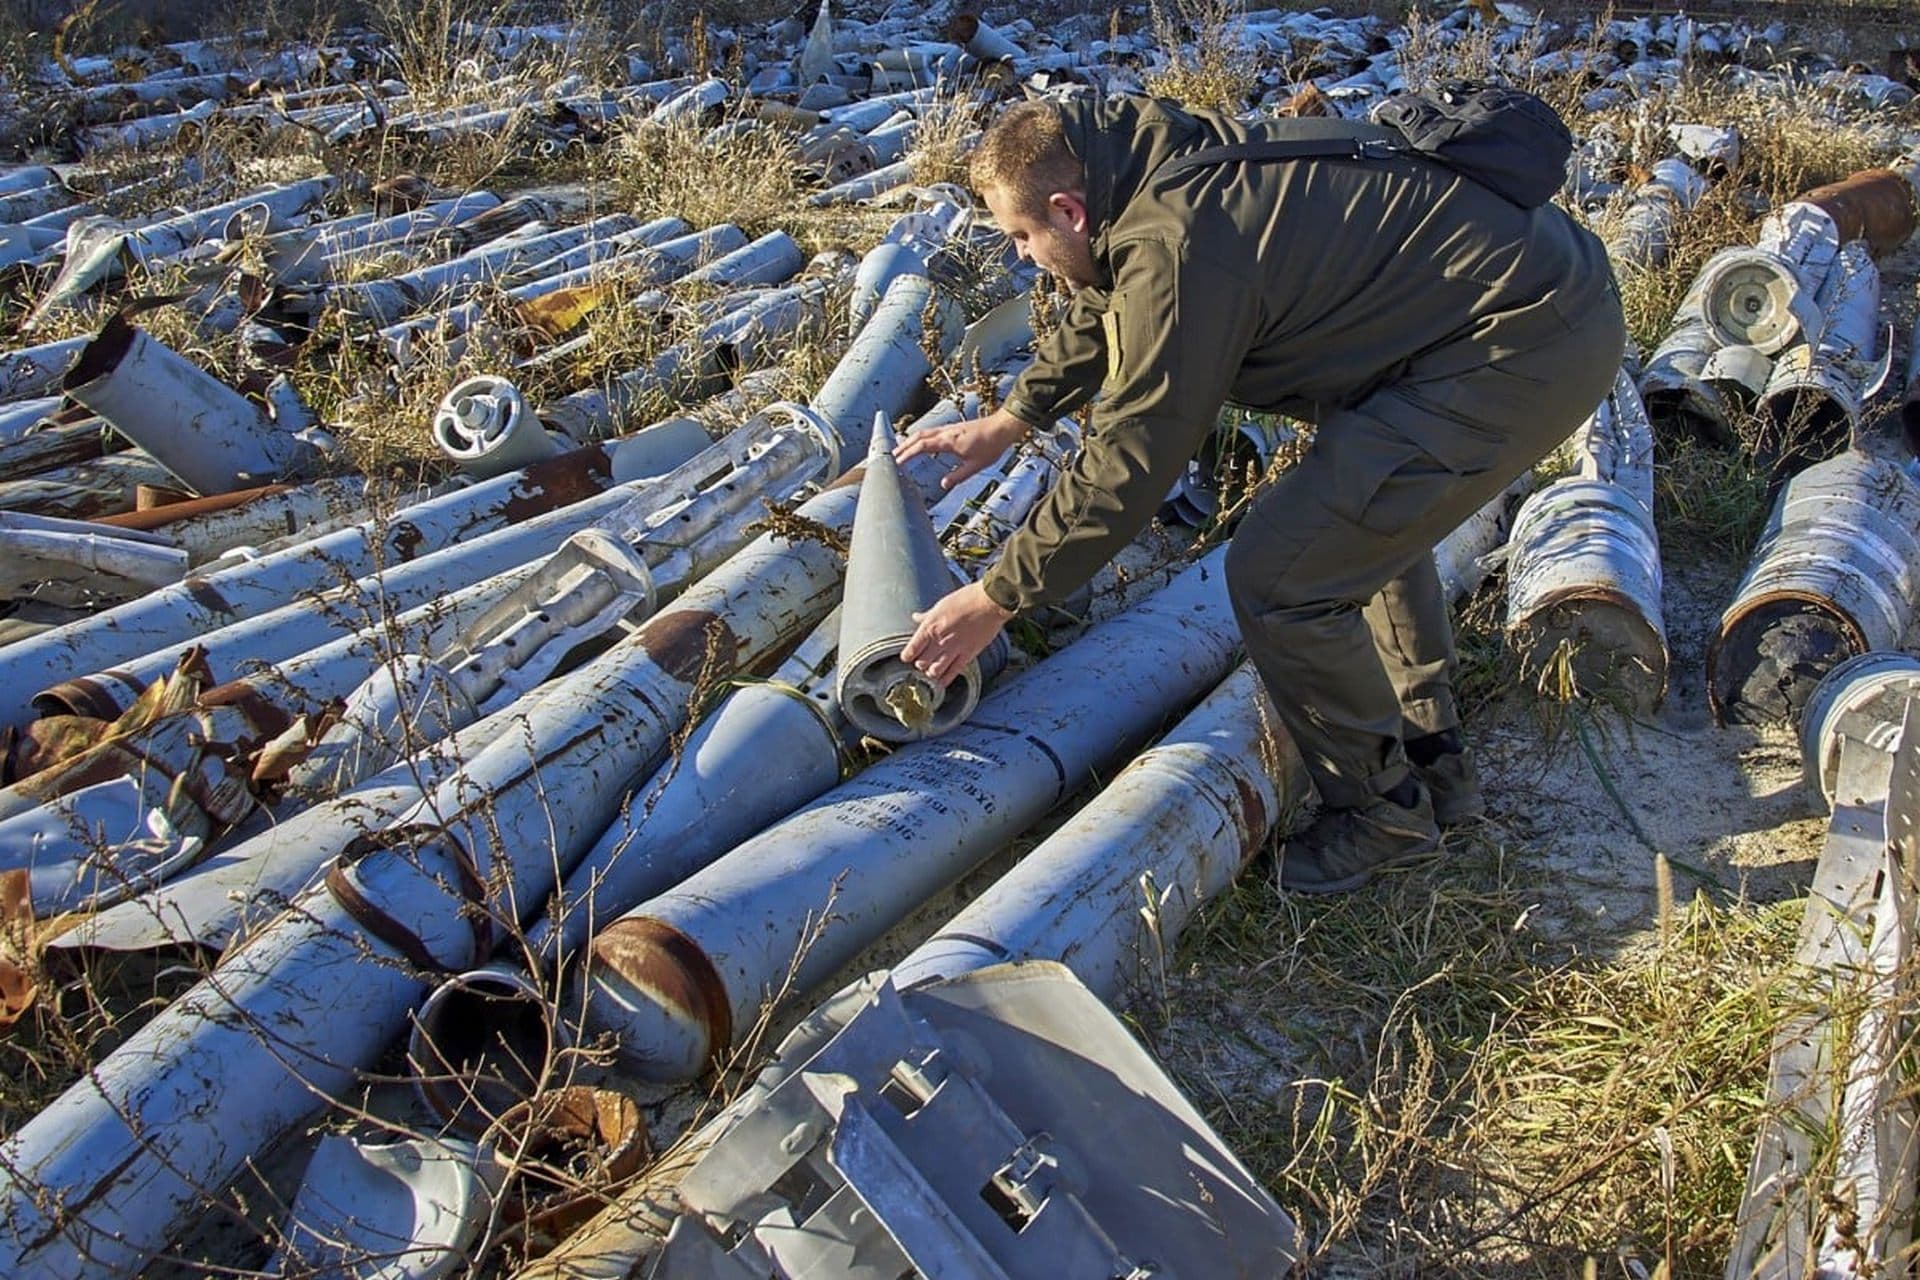 A worker for the prosecutor’s office looks at used missiles collected to be presented as evidence of Russian shellings against civilian targets in Kharkiv